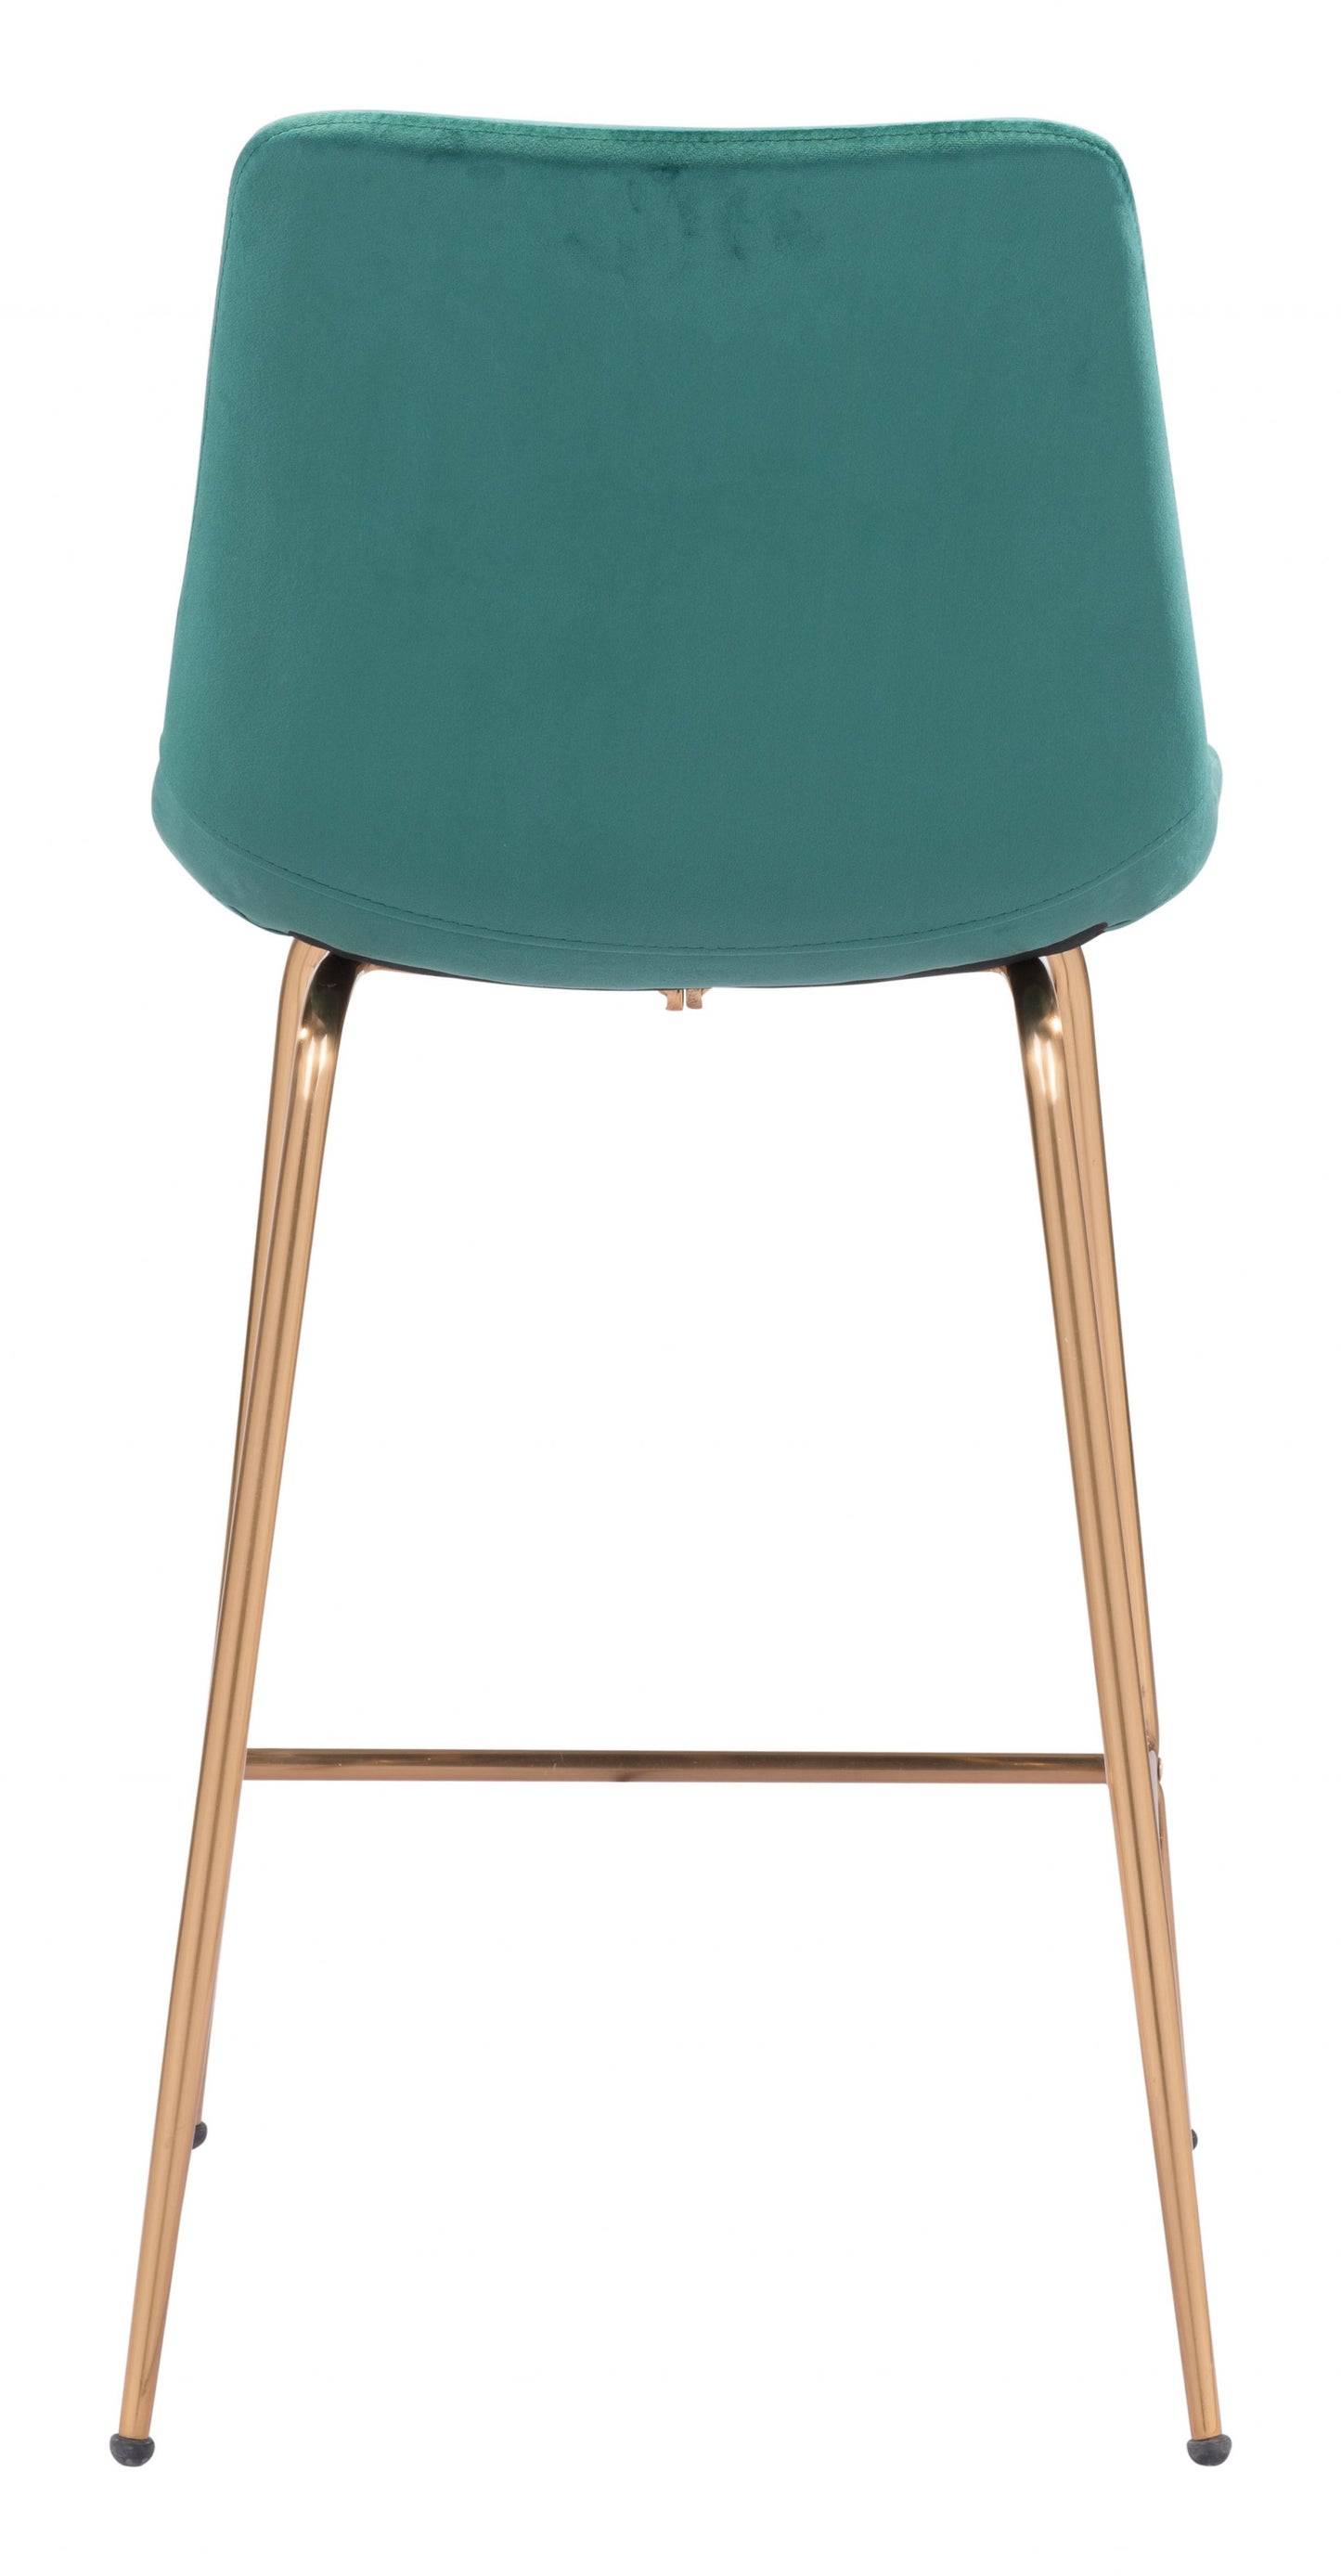 39" Green Steel Low Back Chair With Footrest By Homeroots